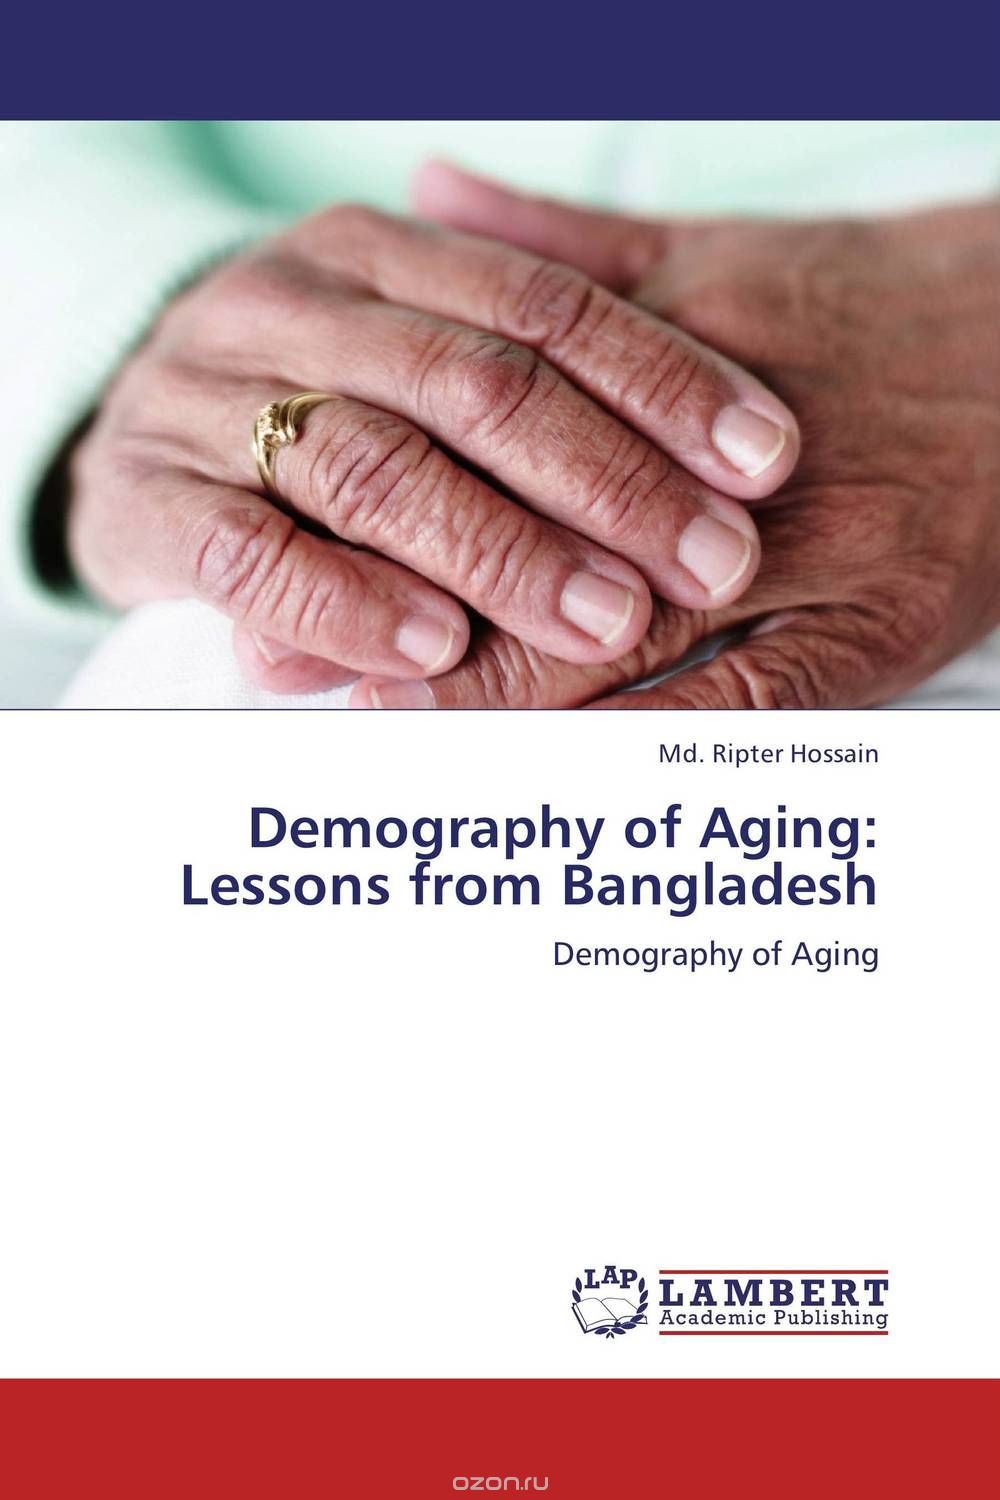 Demography of Aging: Lessons from Bangladesh